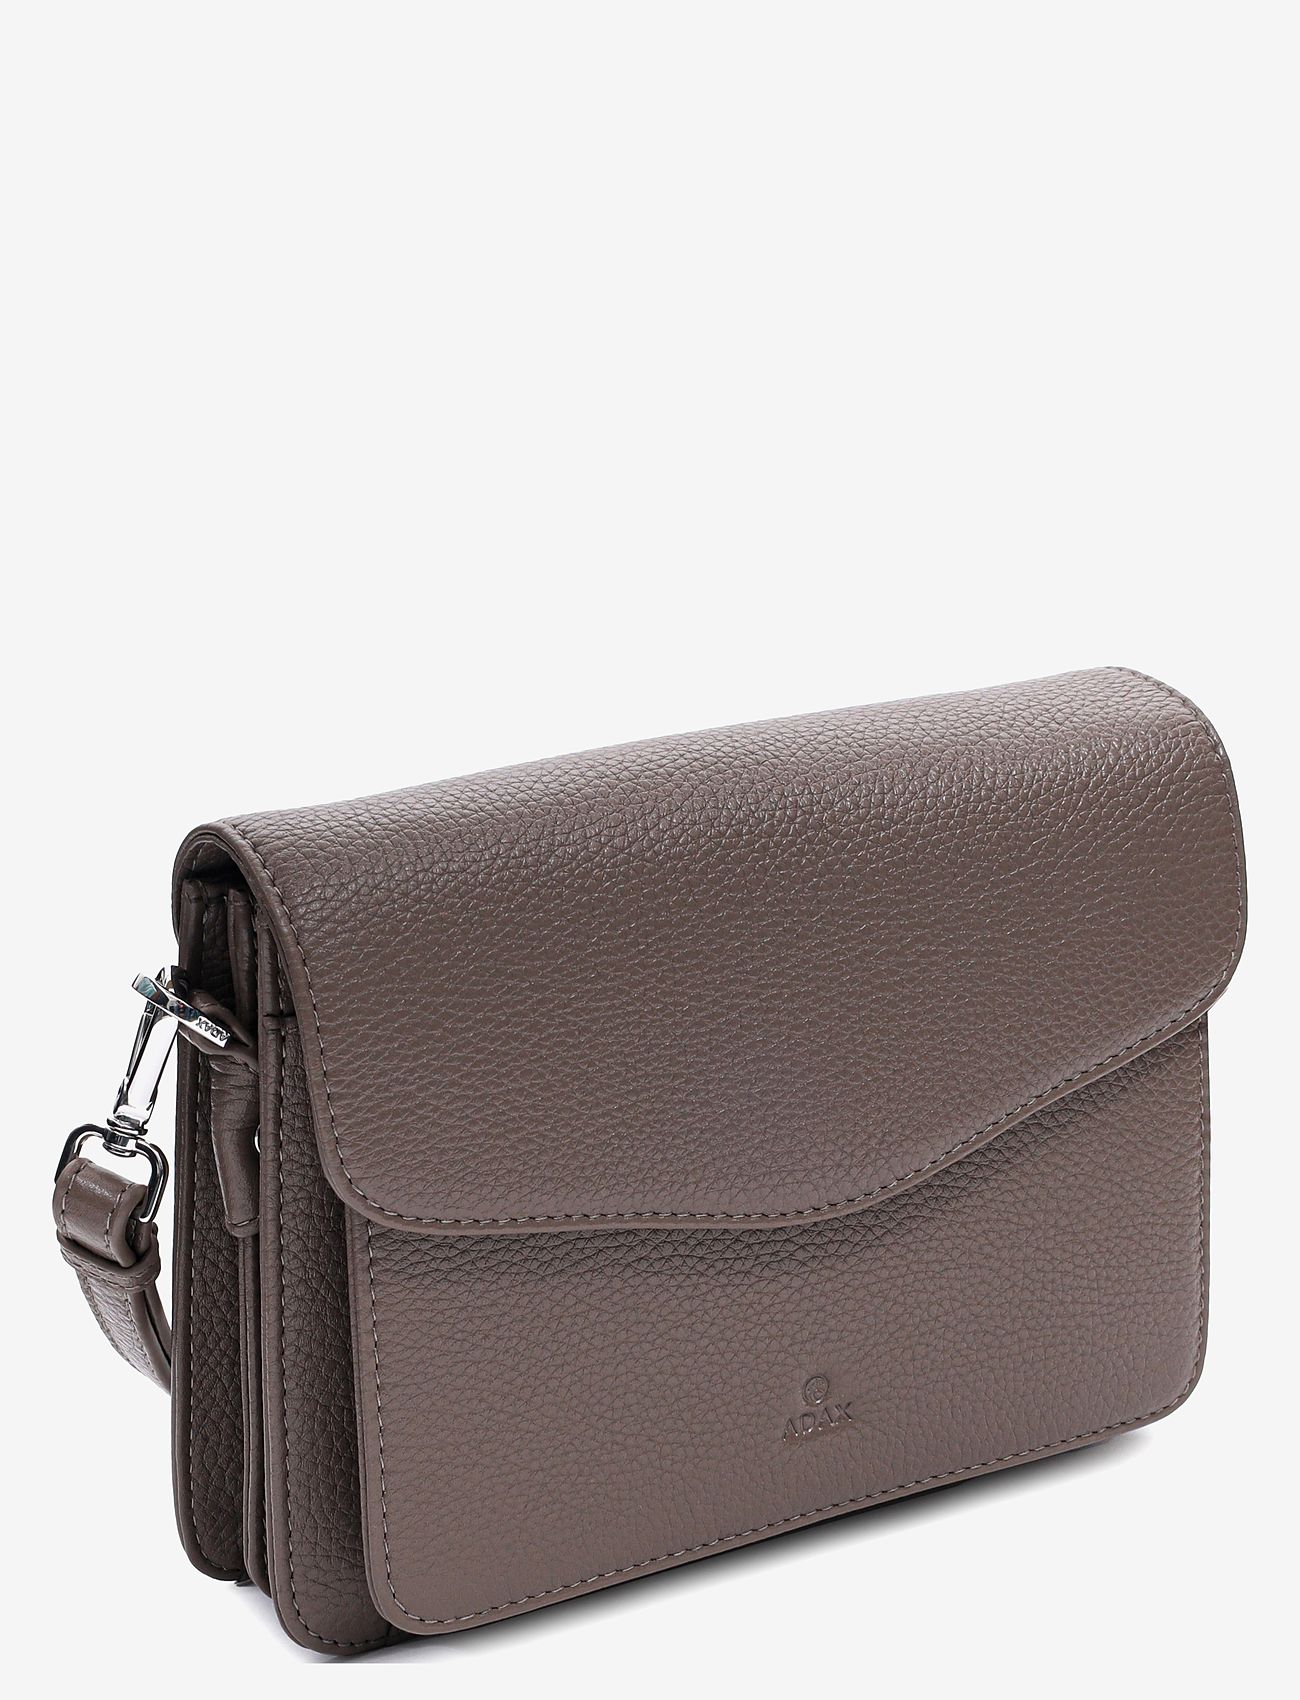 Adax - Cormorano shoulder bag Zafira - party wear at outlet prices - taupe - 1